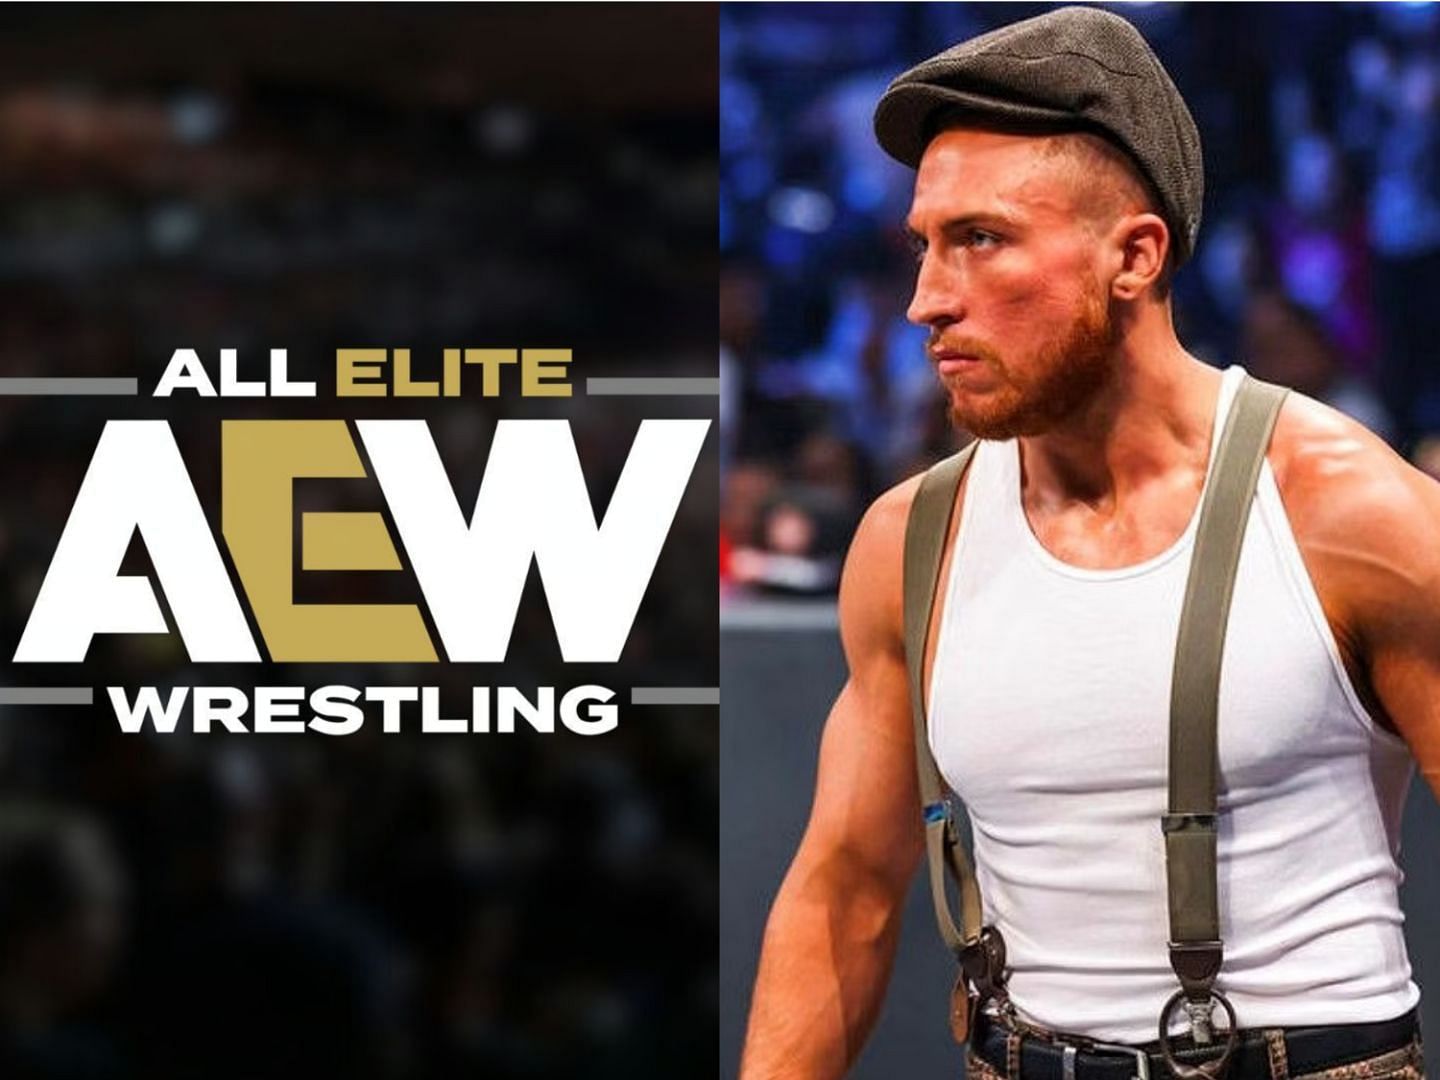 Butch calls out AEW star on Twitter.